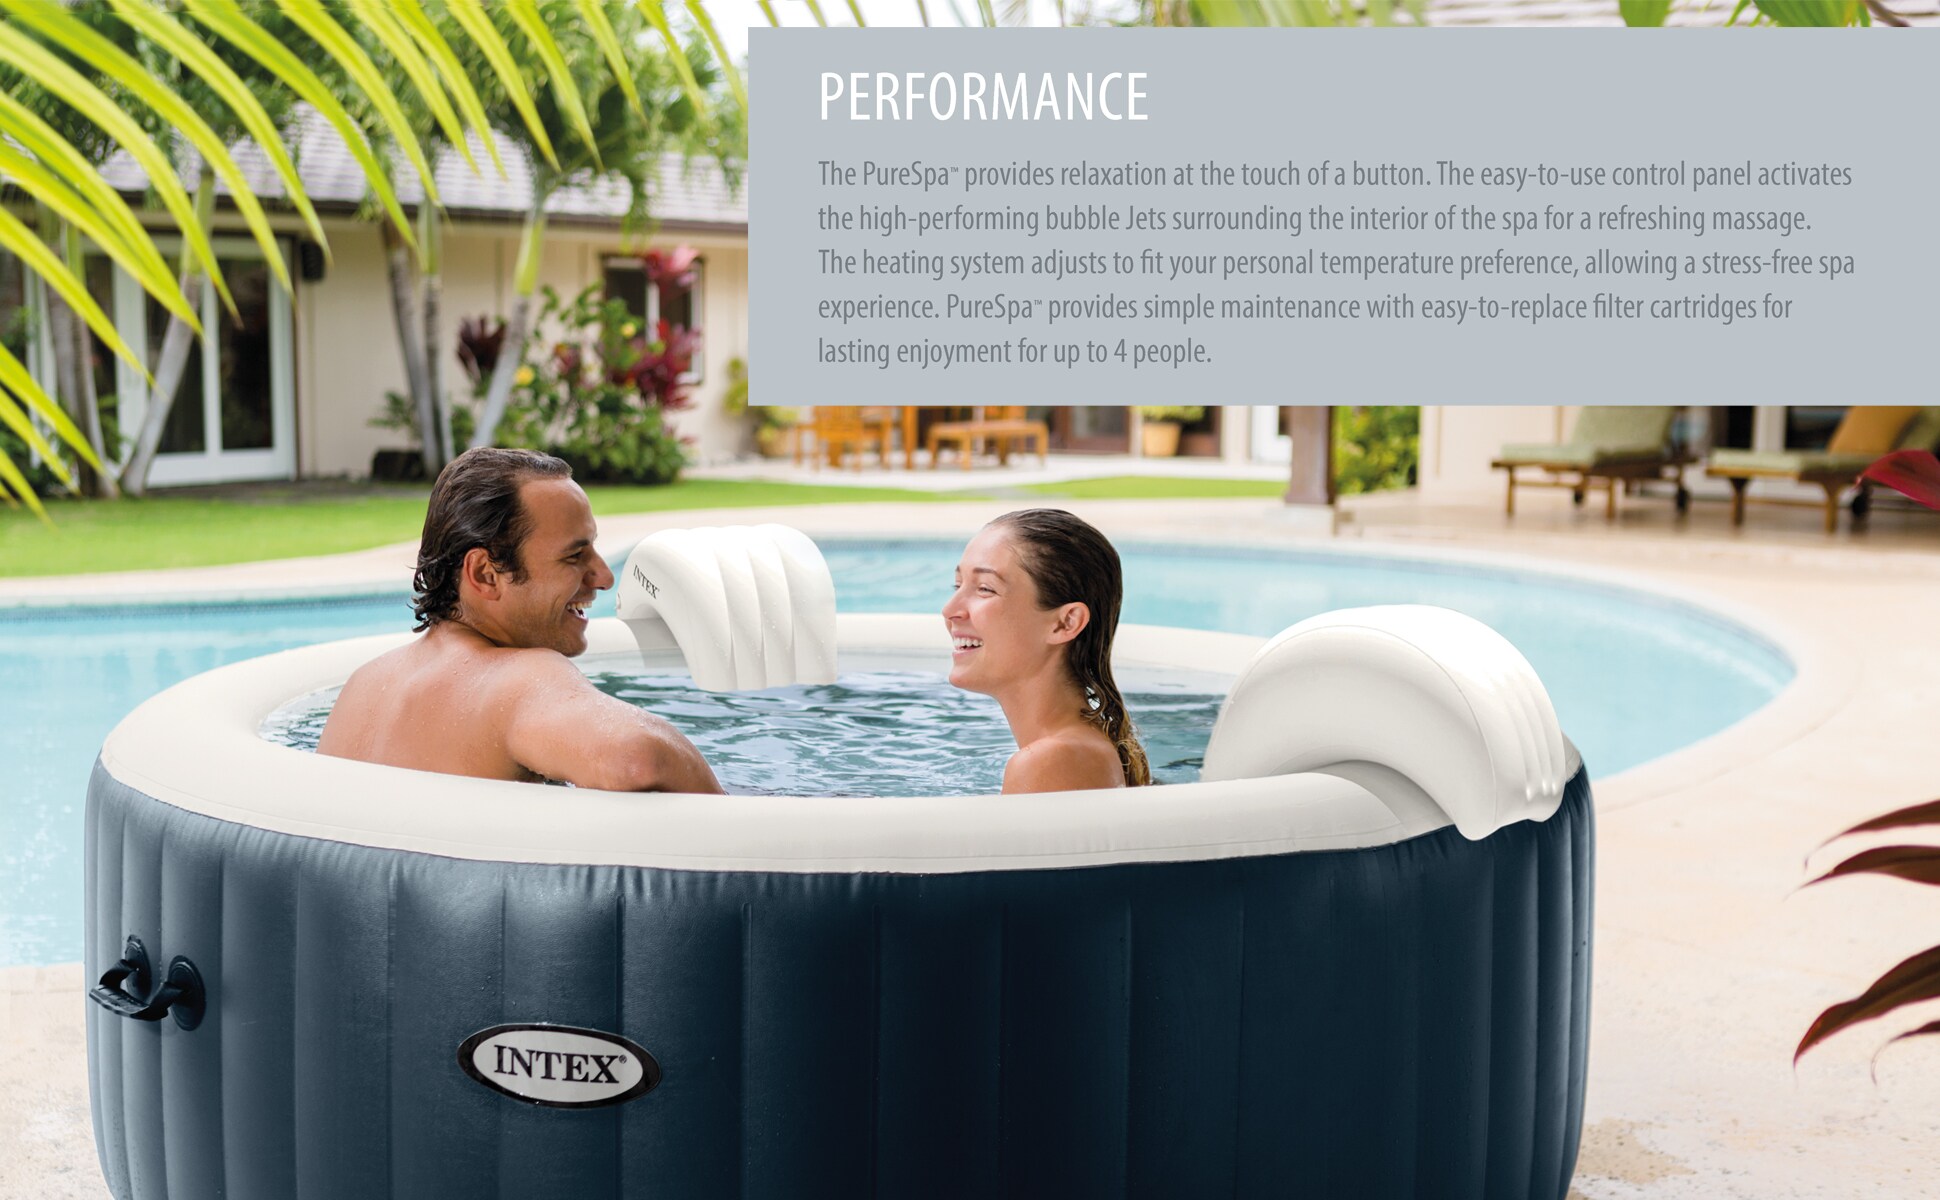 Intex 6-Person Inflatable Round Hot Tub at Lowes.com